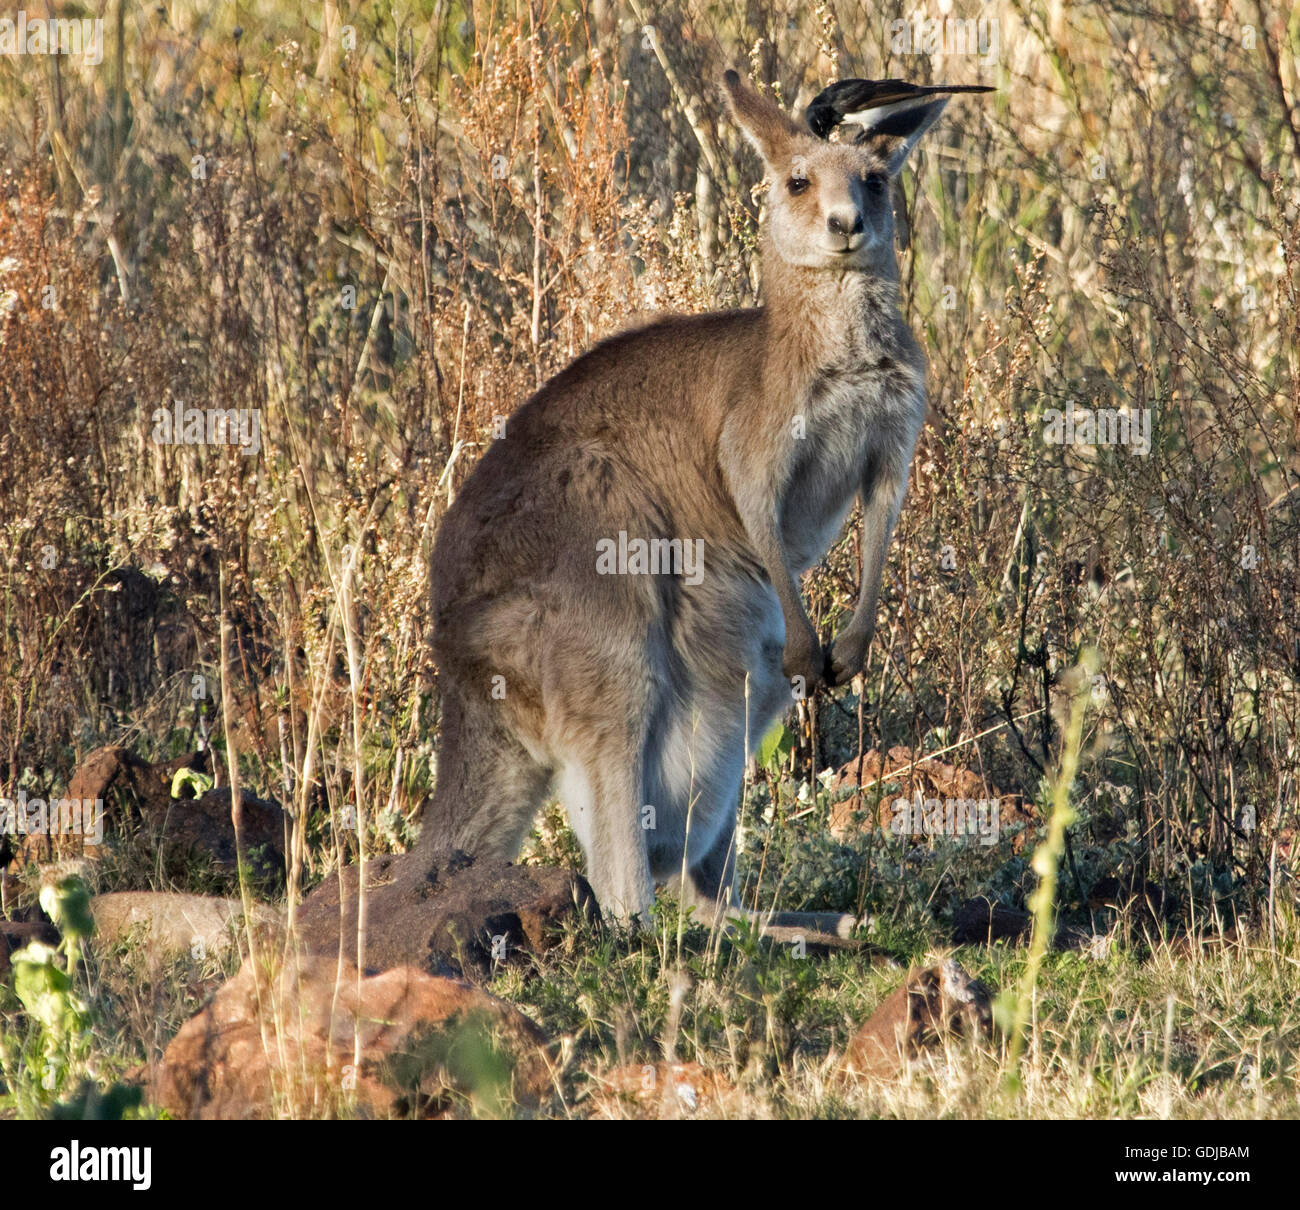 Unusual companions, eastern grey kangaroo Macropus giganteus in the wild with willy wagtail on head feeding on insects from among dense fur Stock Photo